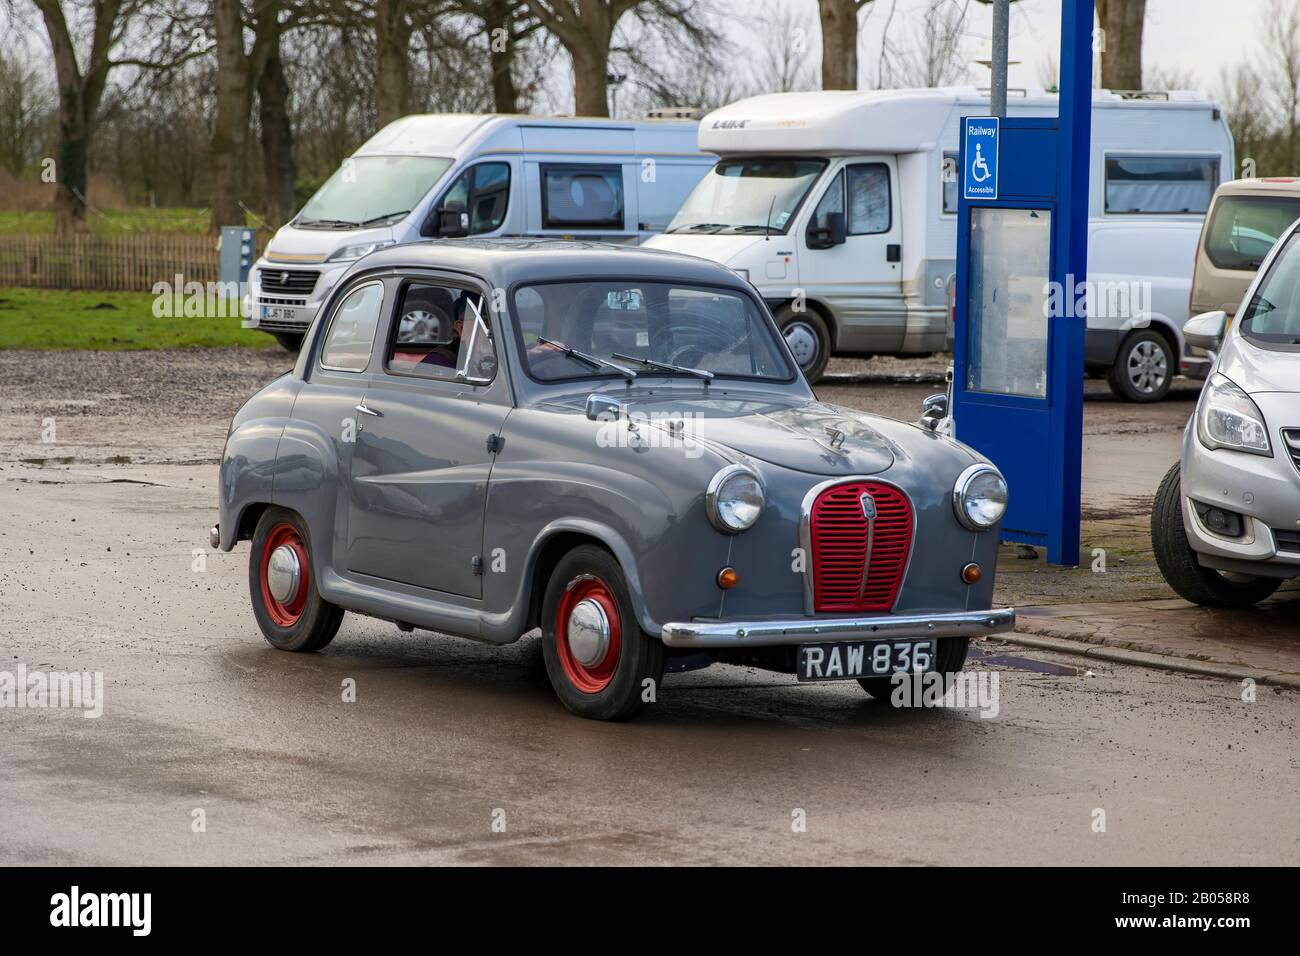 Austin A35, 1958, Reg No: RAW 836, at The Great Western Classic Car Show, Shepton Mallet UK, Febuary 08, 2020 Stock Photo